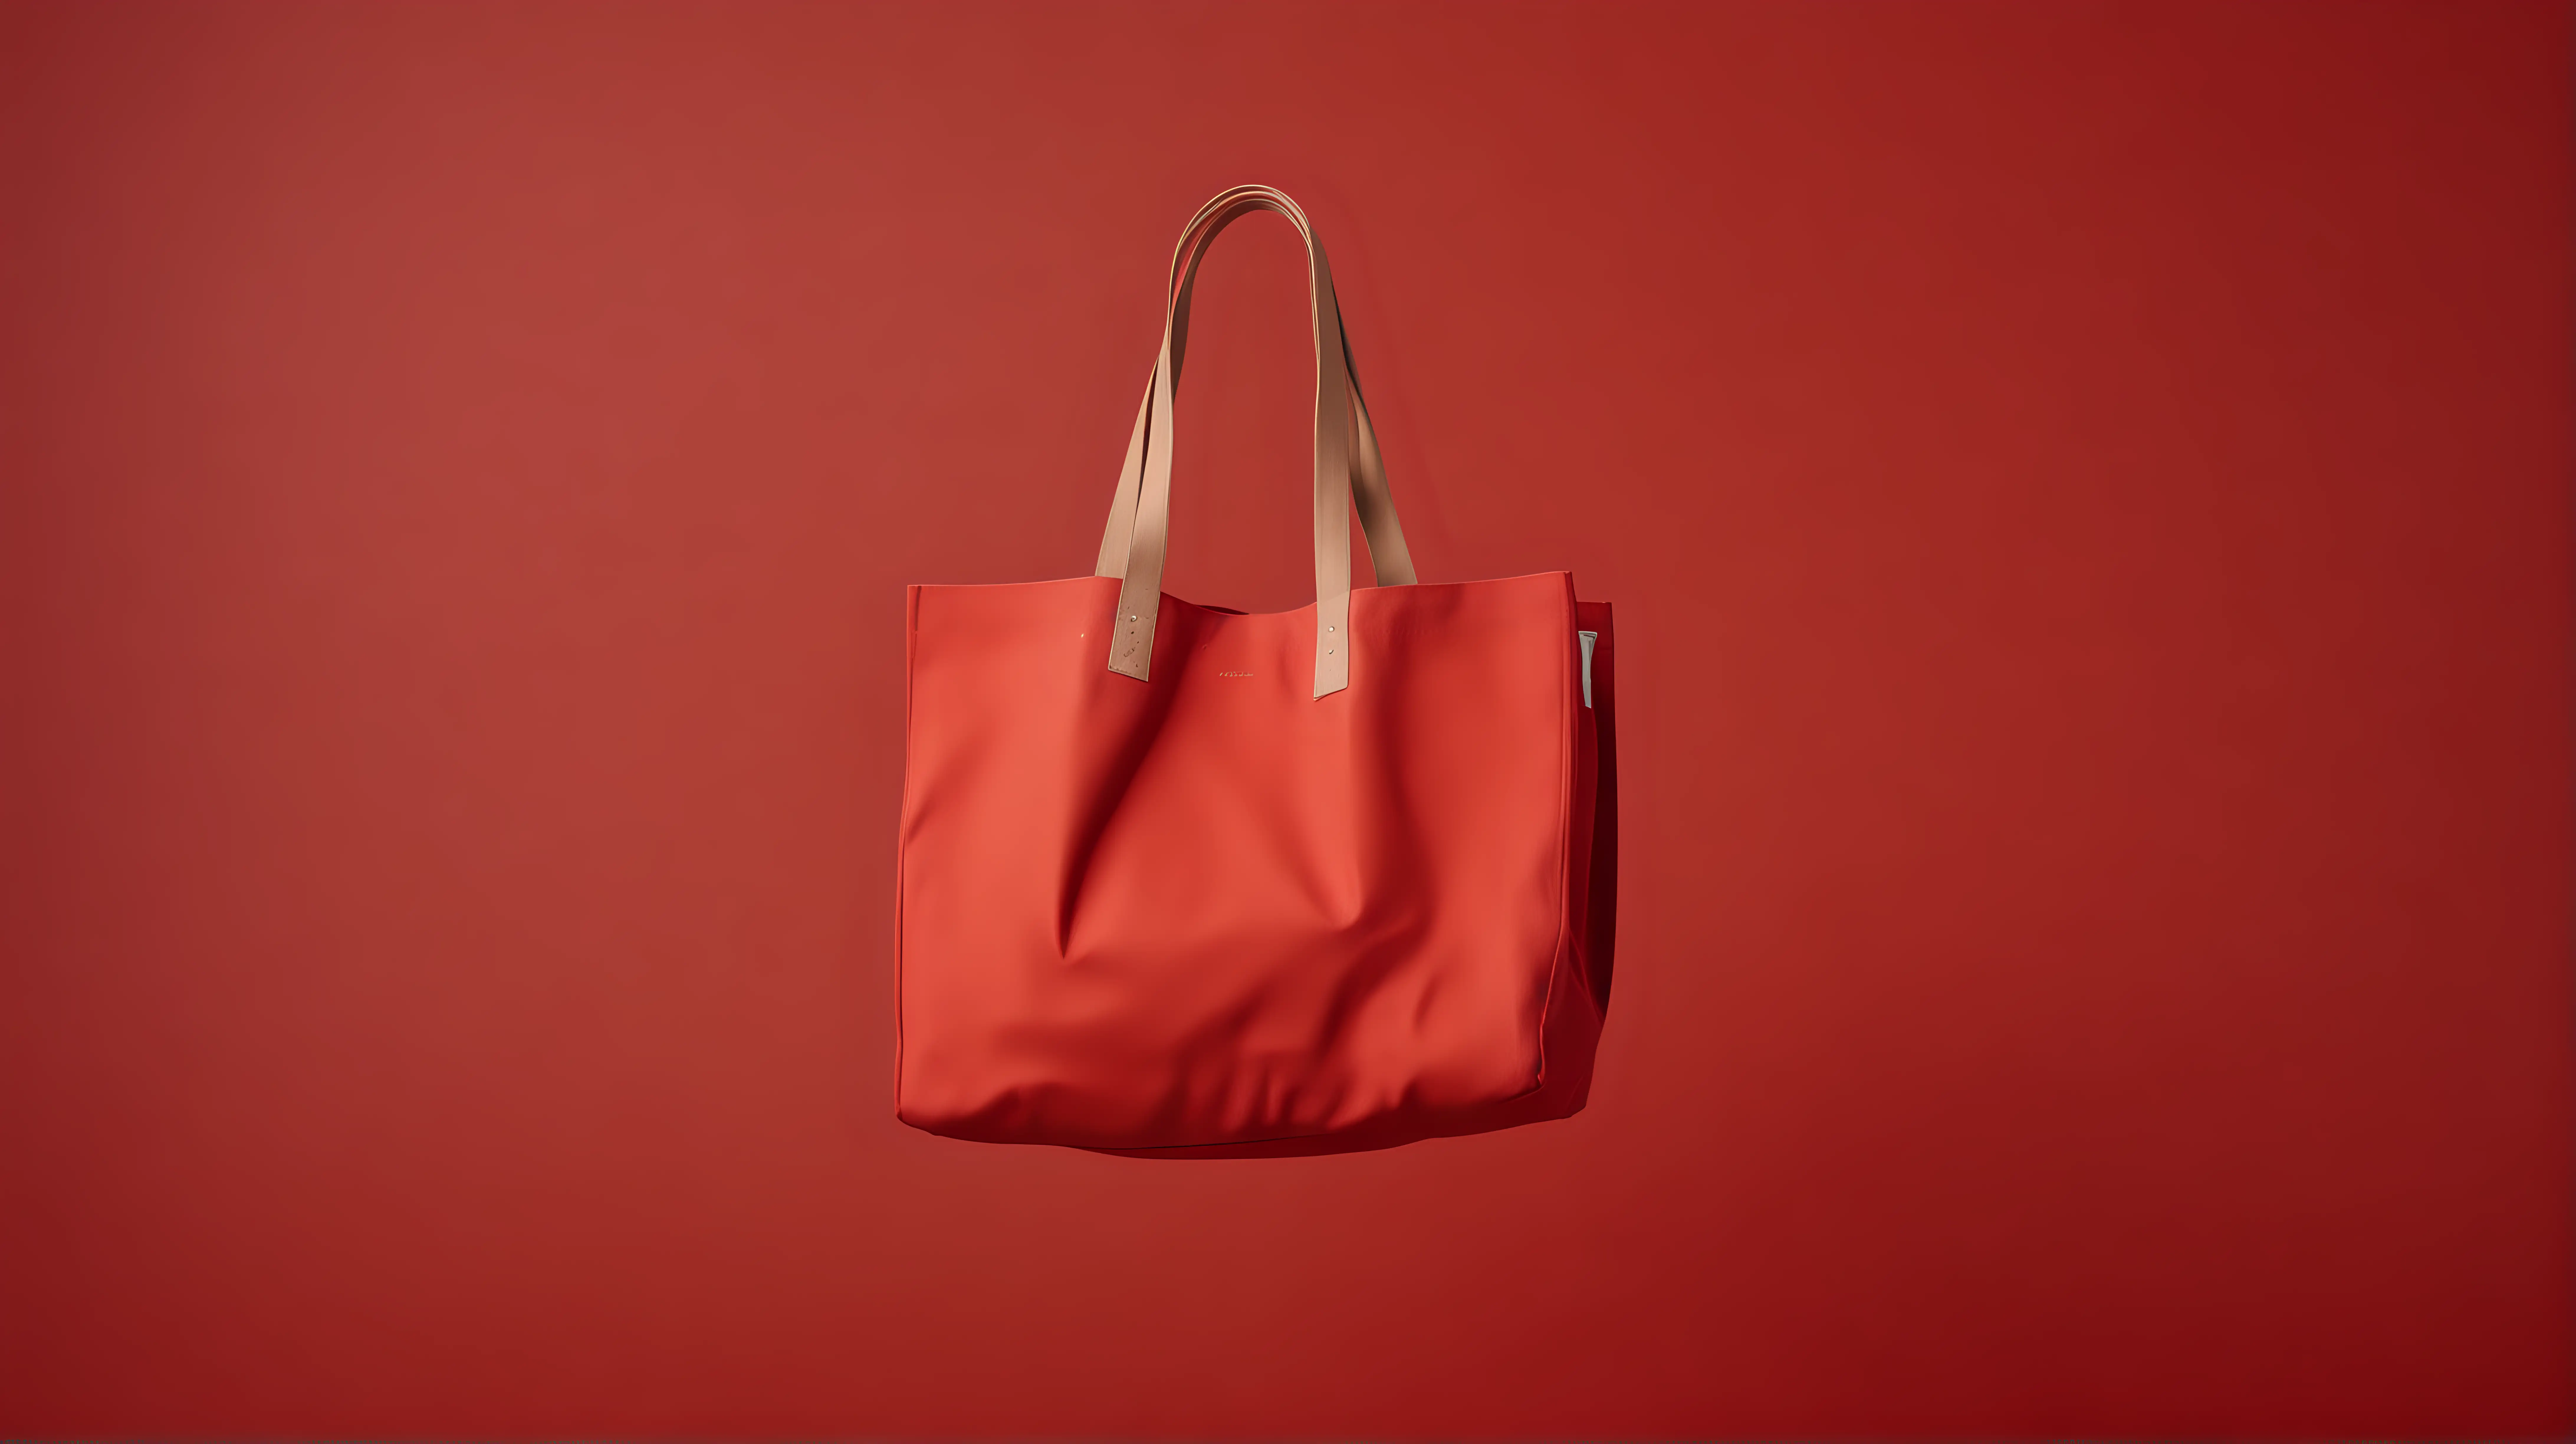 Red canvas tote floating in air in the style of surrealistic masterpieces, the düsseldorf school of photography, red background product design, avant-garde portraiture
